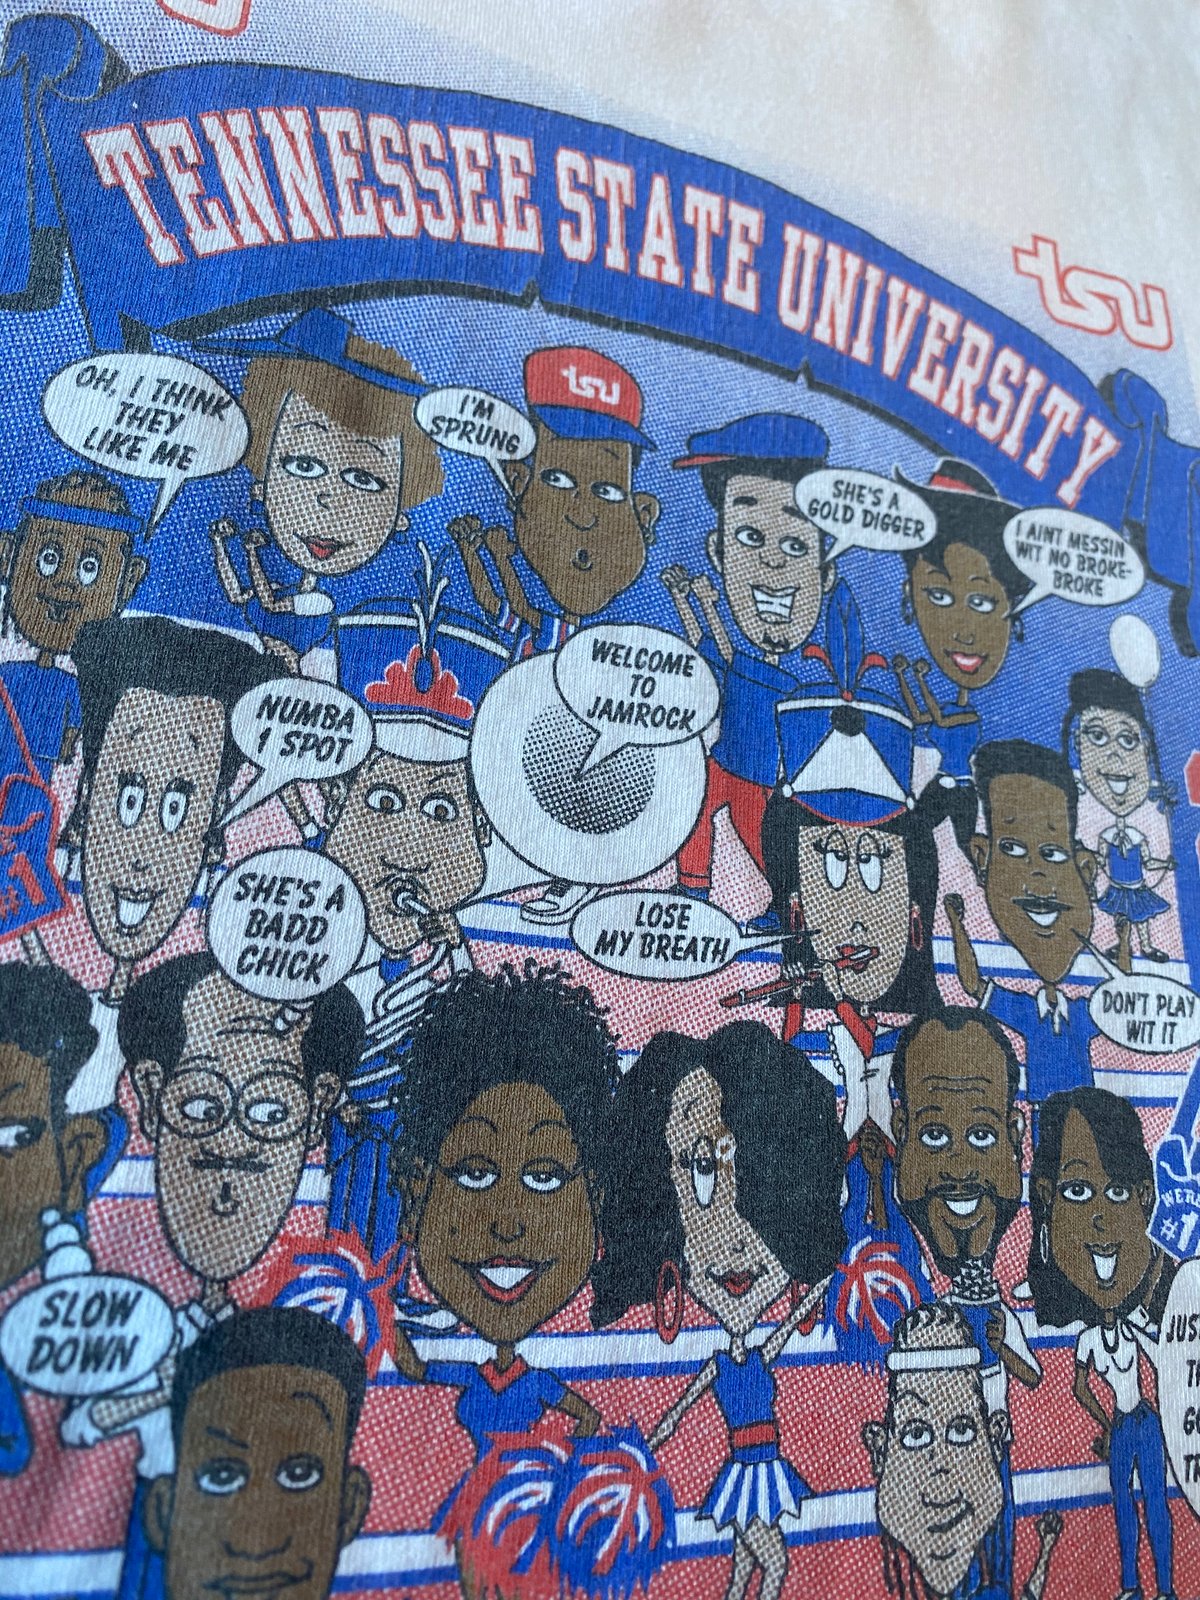 Image of 2005 TENNESSEE STATE UNIVERSITY HOMECOMING TEE